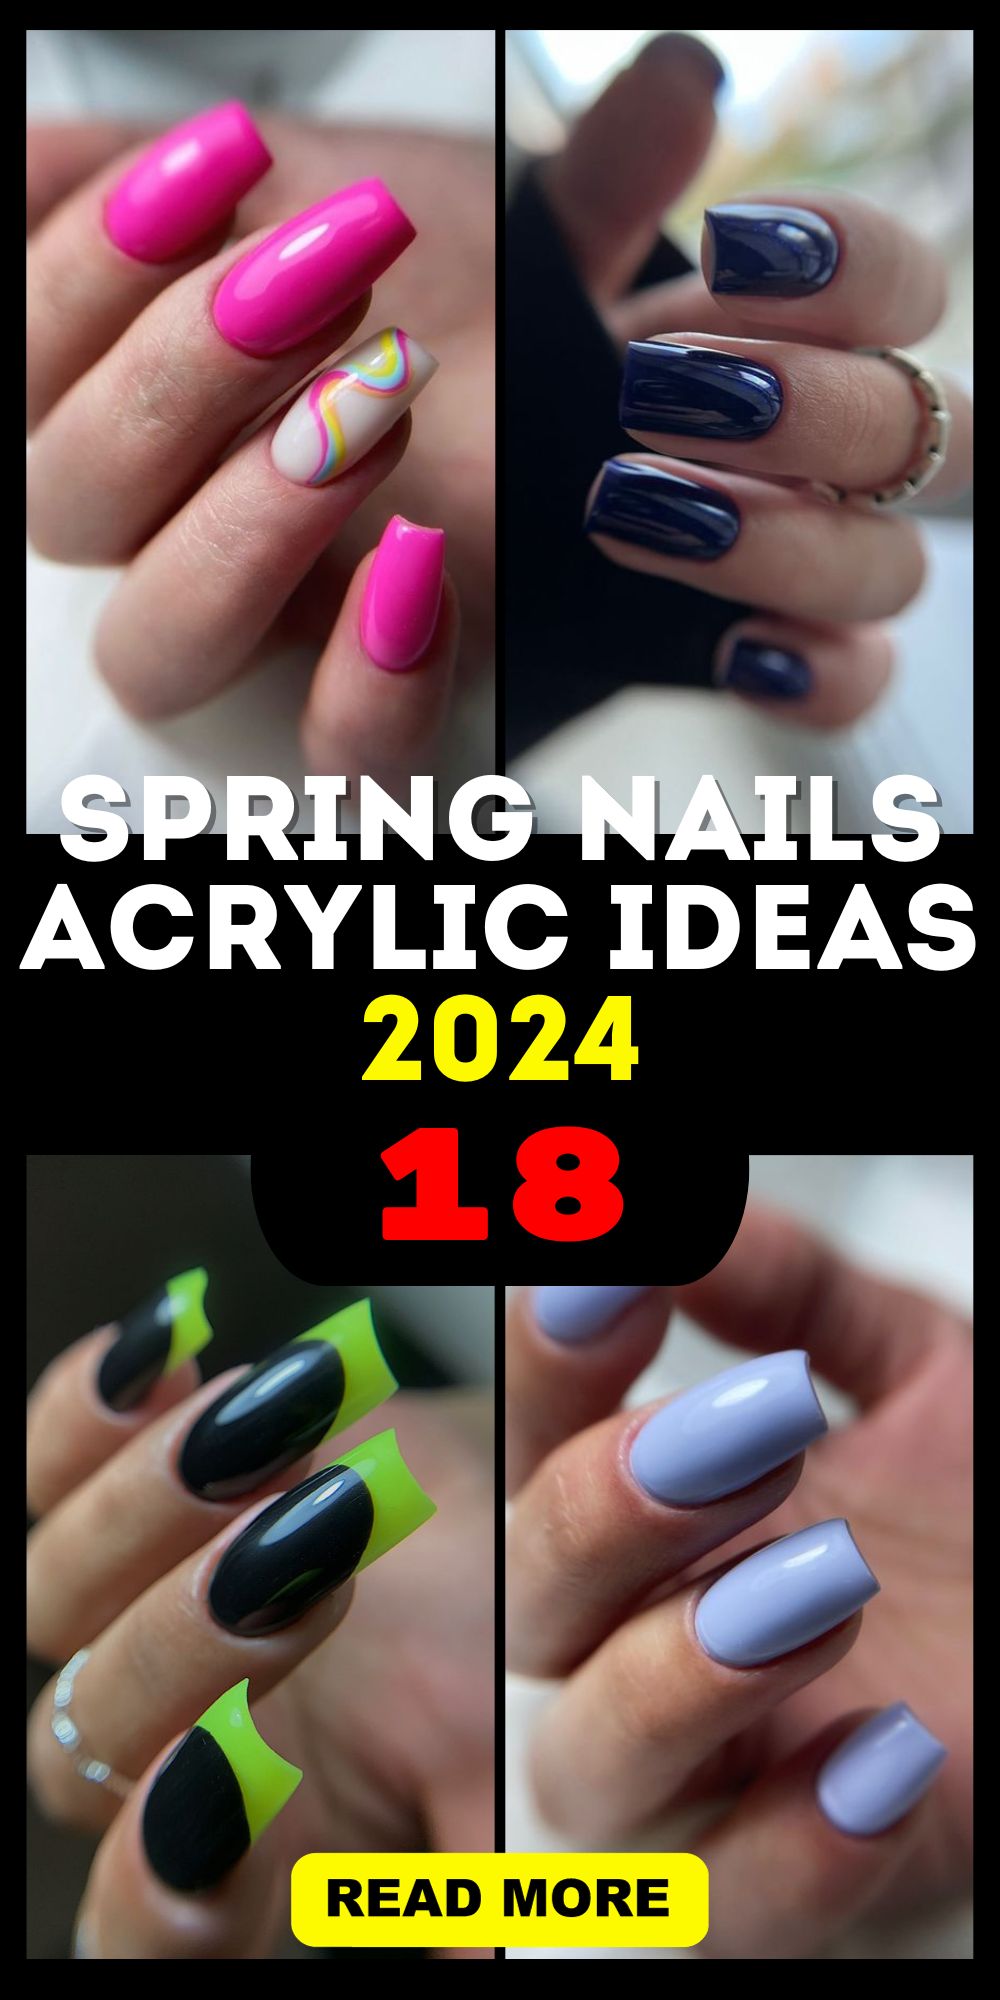 Stunning Spring Nails Acrylic 2024 – Trendy, Cute, and Colorful Coffin ...